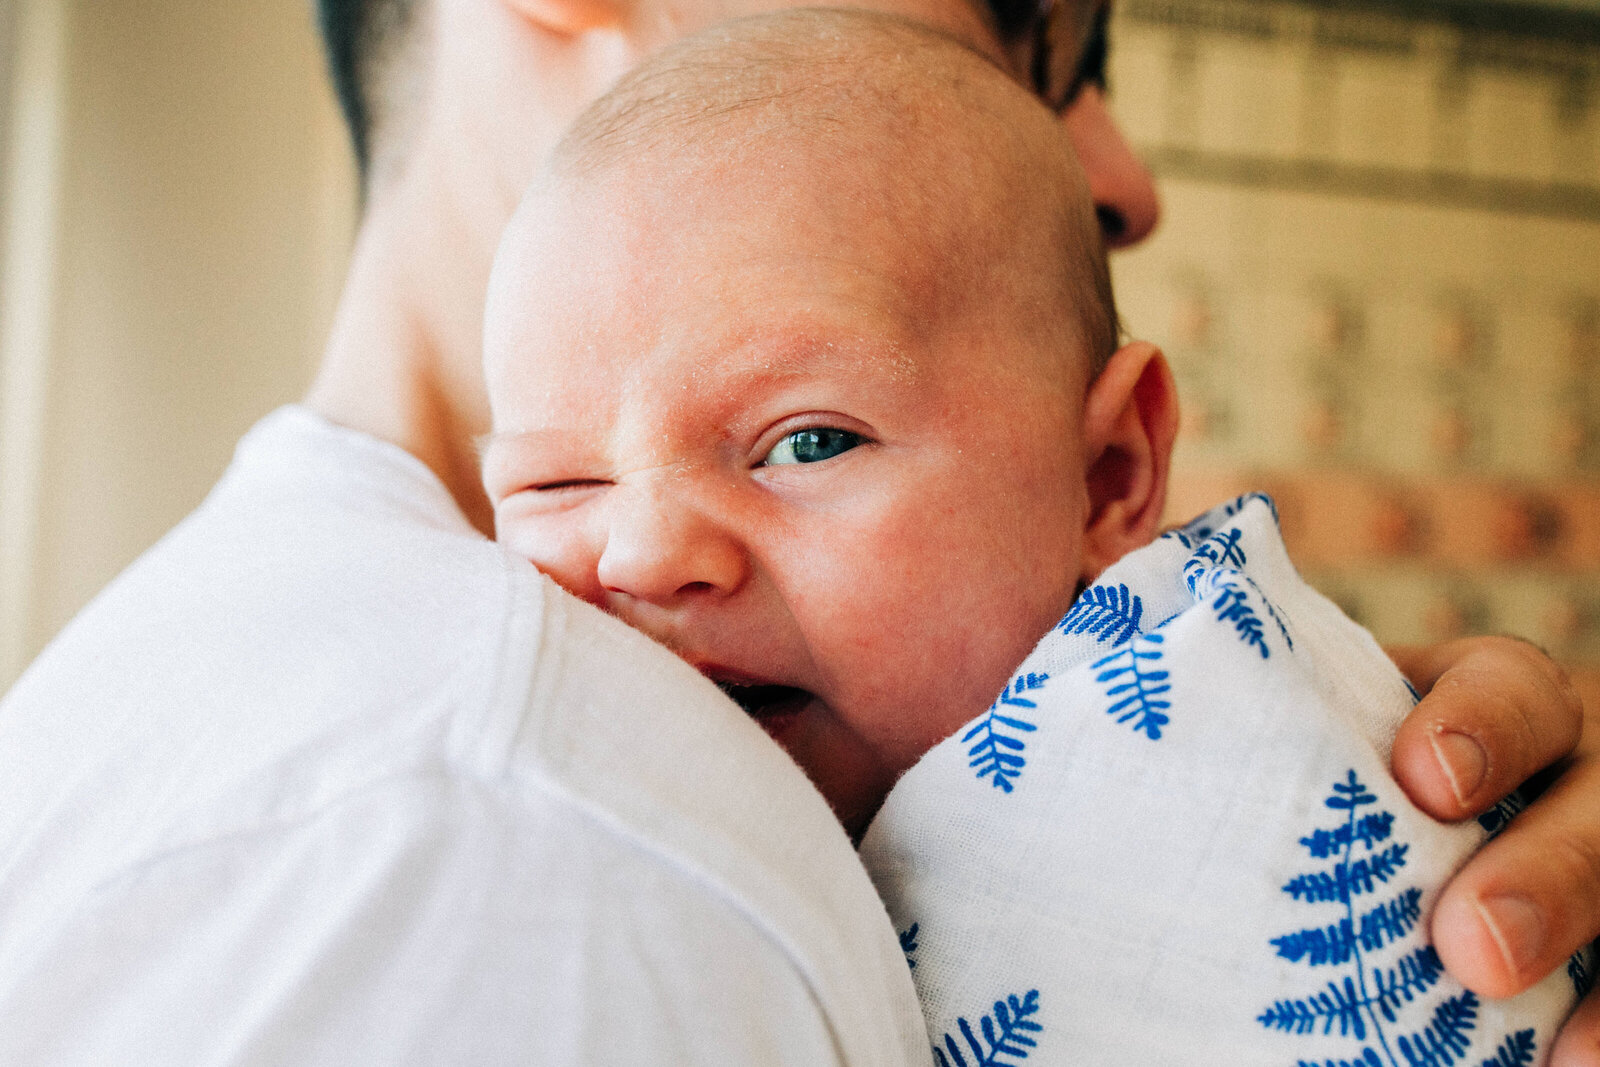 dad holding newborn baby boy in blue and white swaddle who is winking at the camera